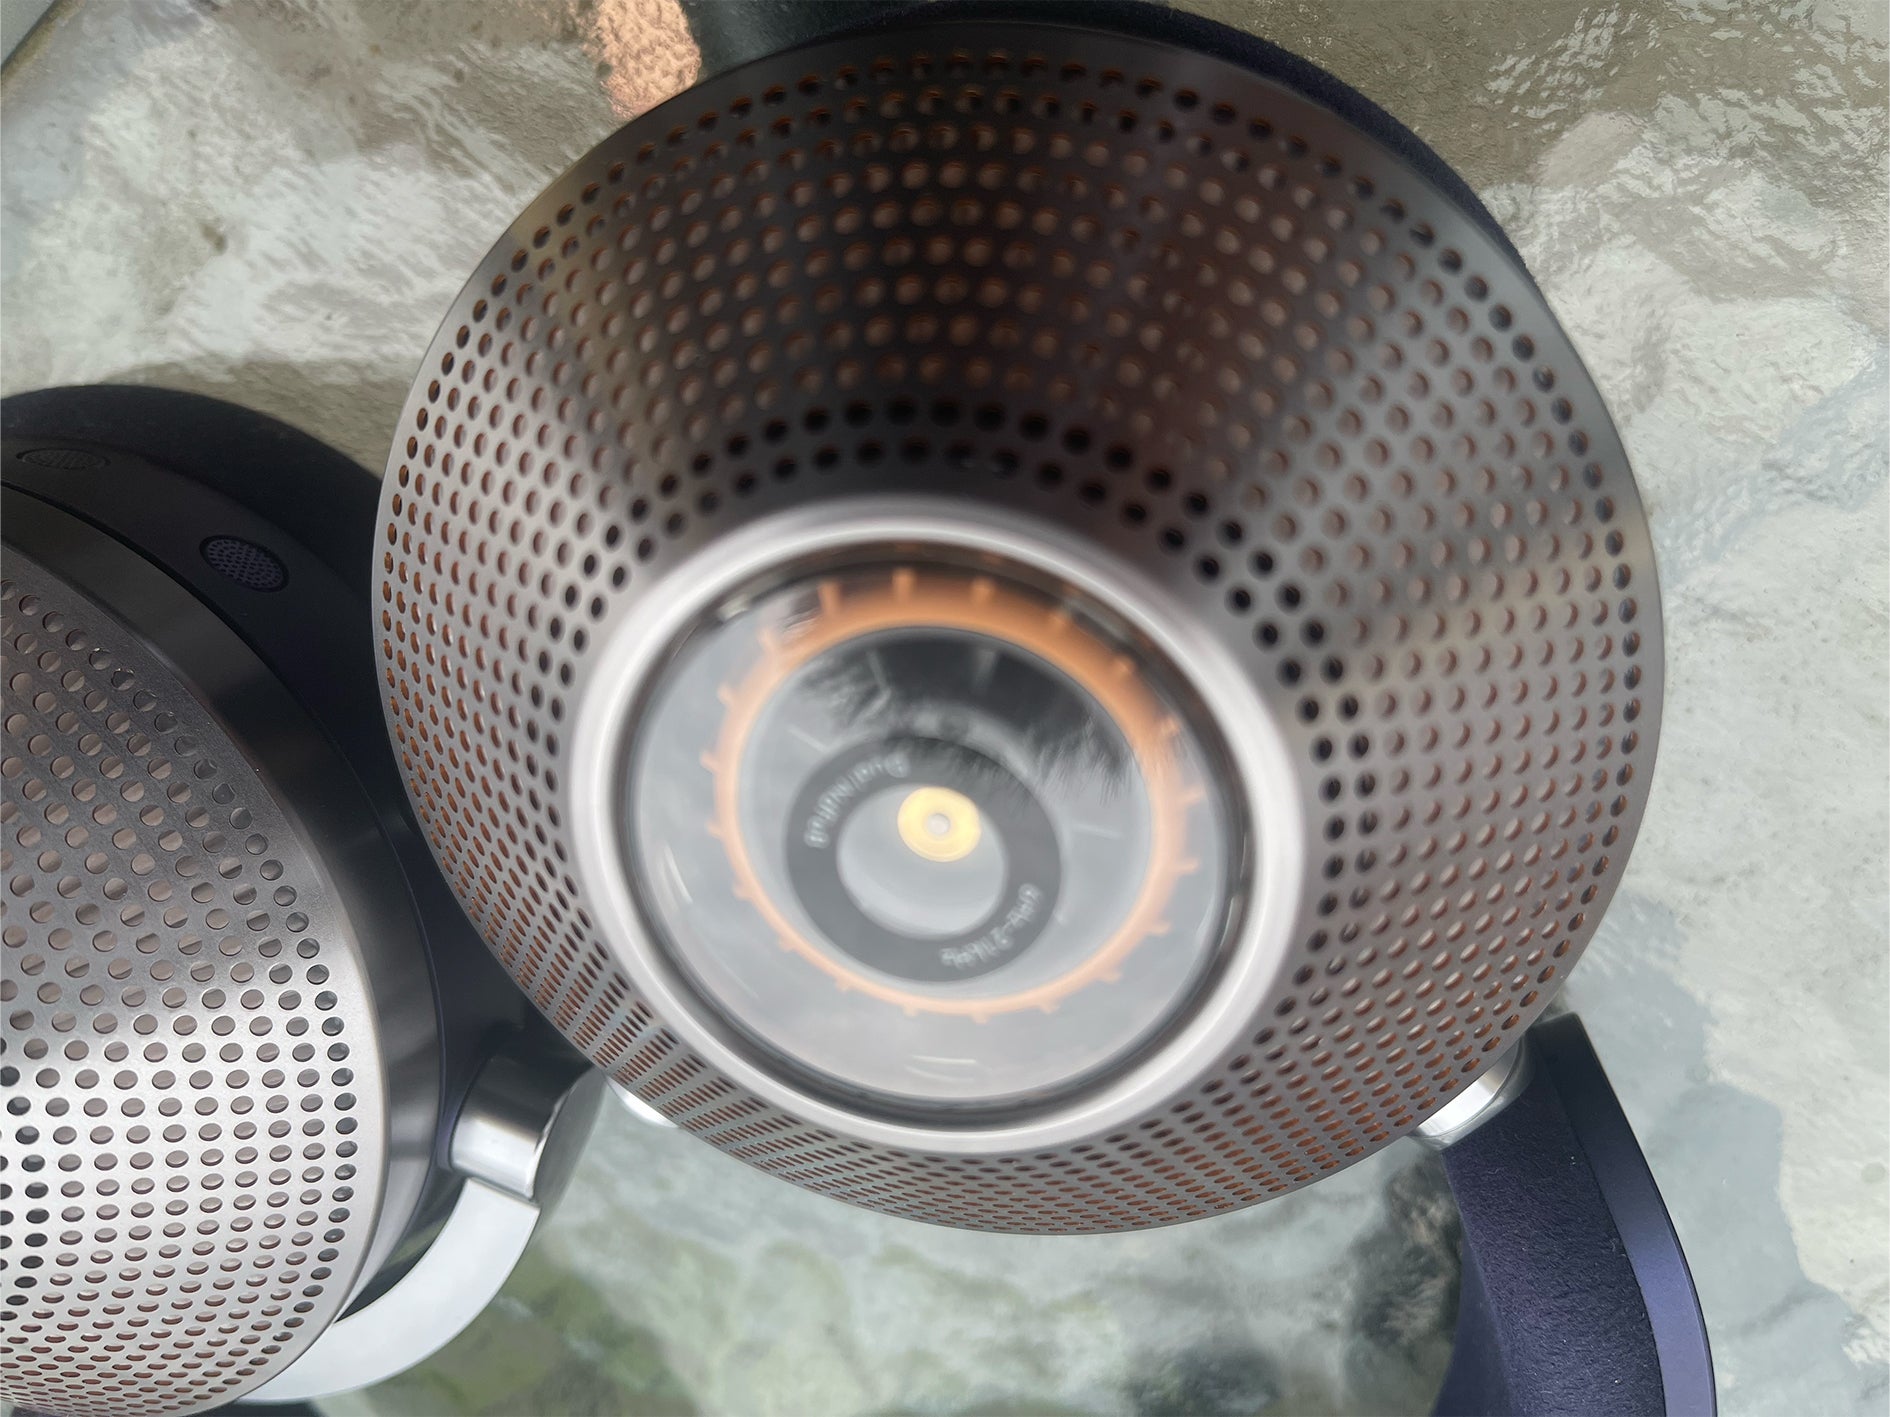 Up close and personal with the Dyson Zone’s grills